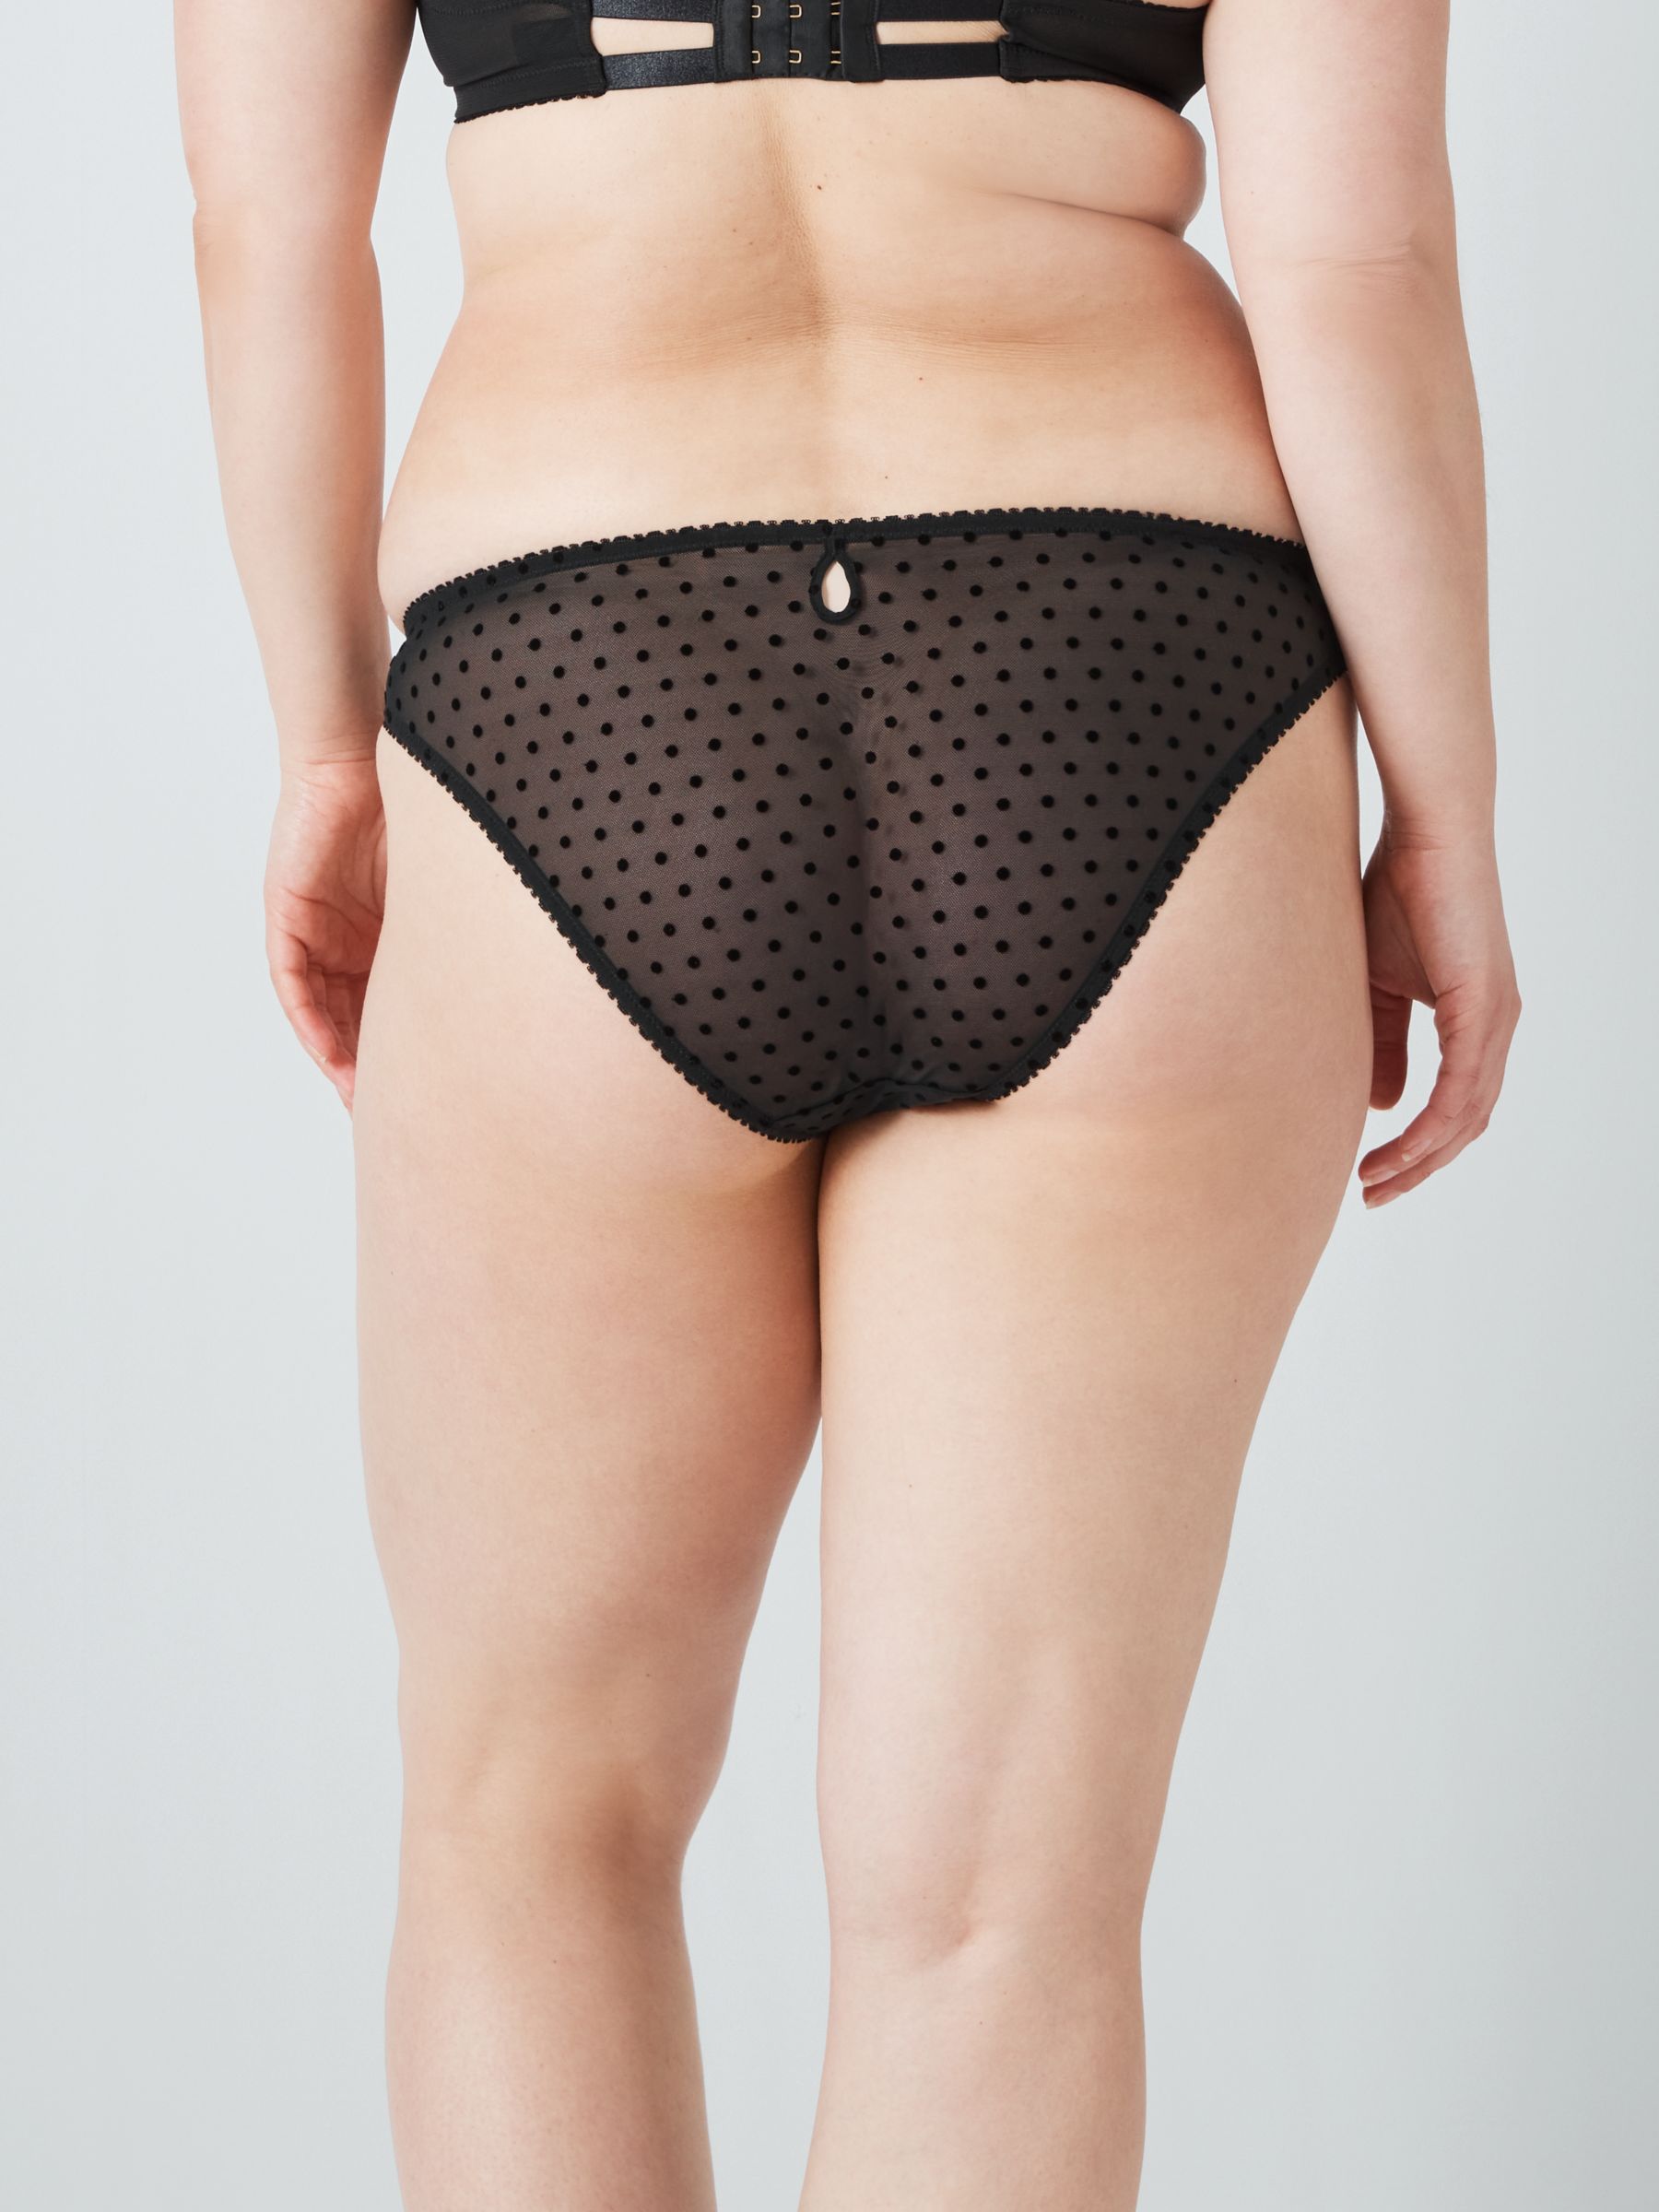 AND/OR Coco Polka Dot Mesh Knickers, Black, 8